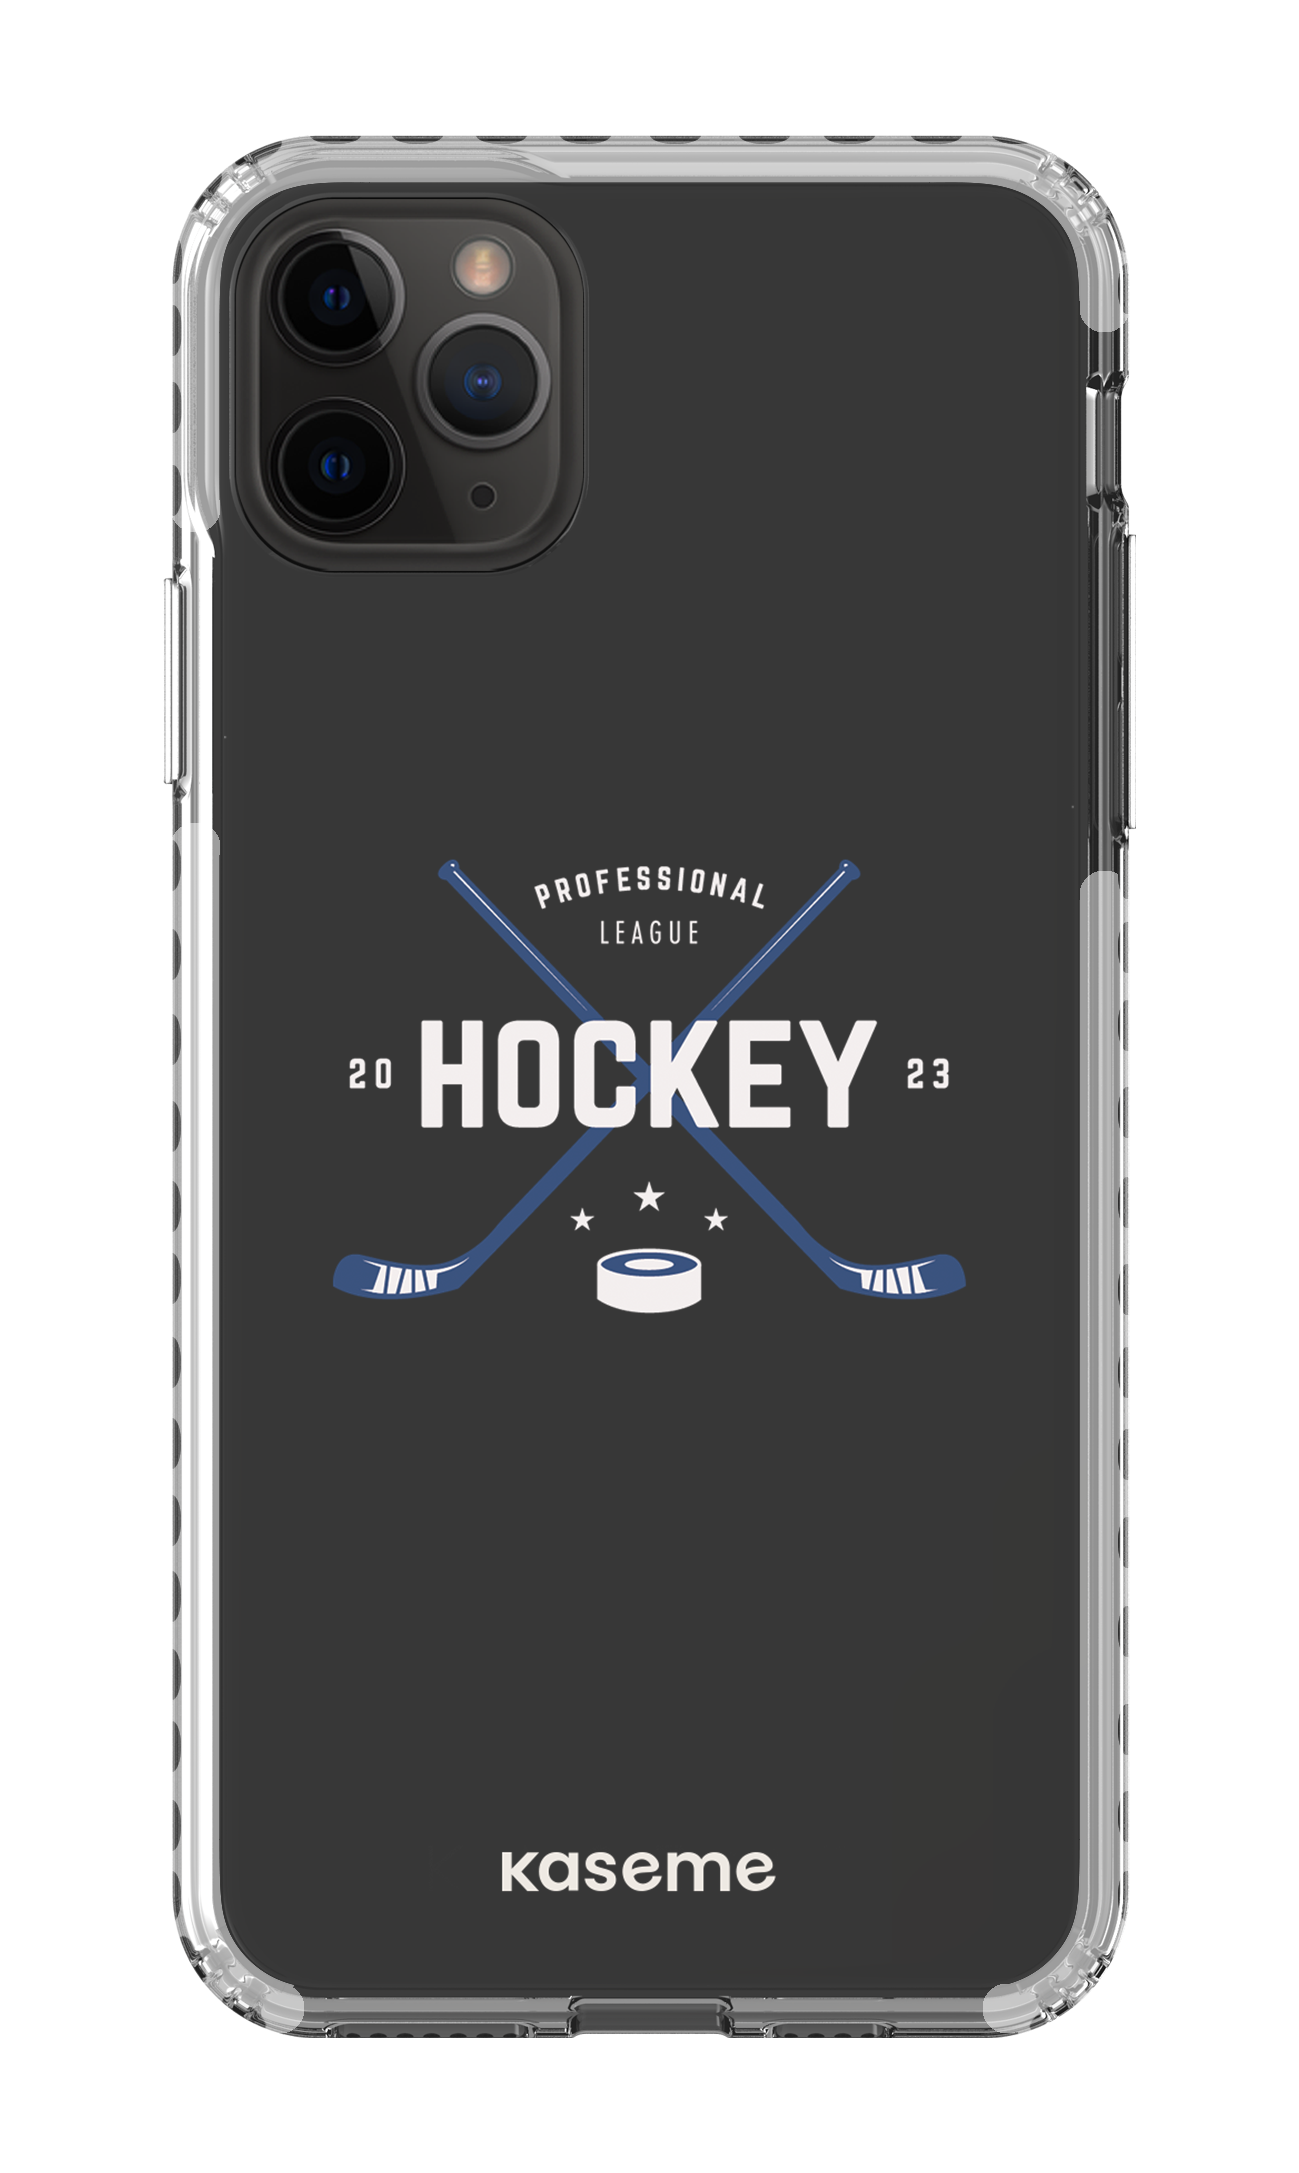 Playoffs clear case - iPhone 11 pro Max